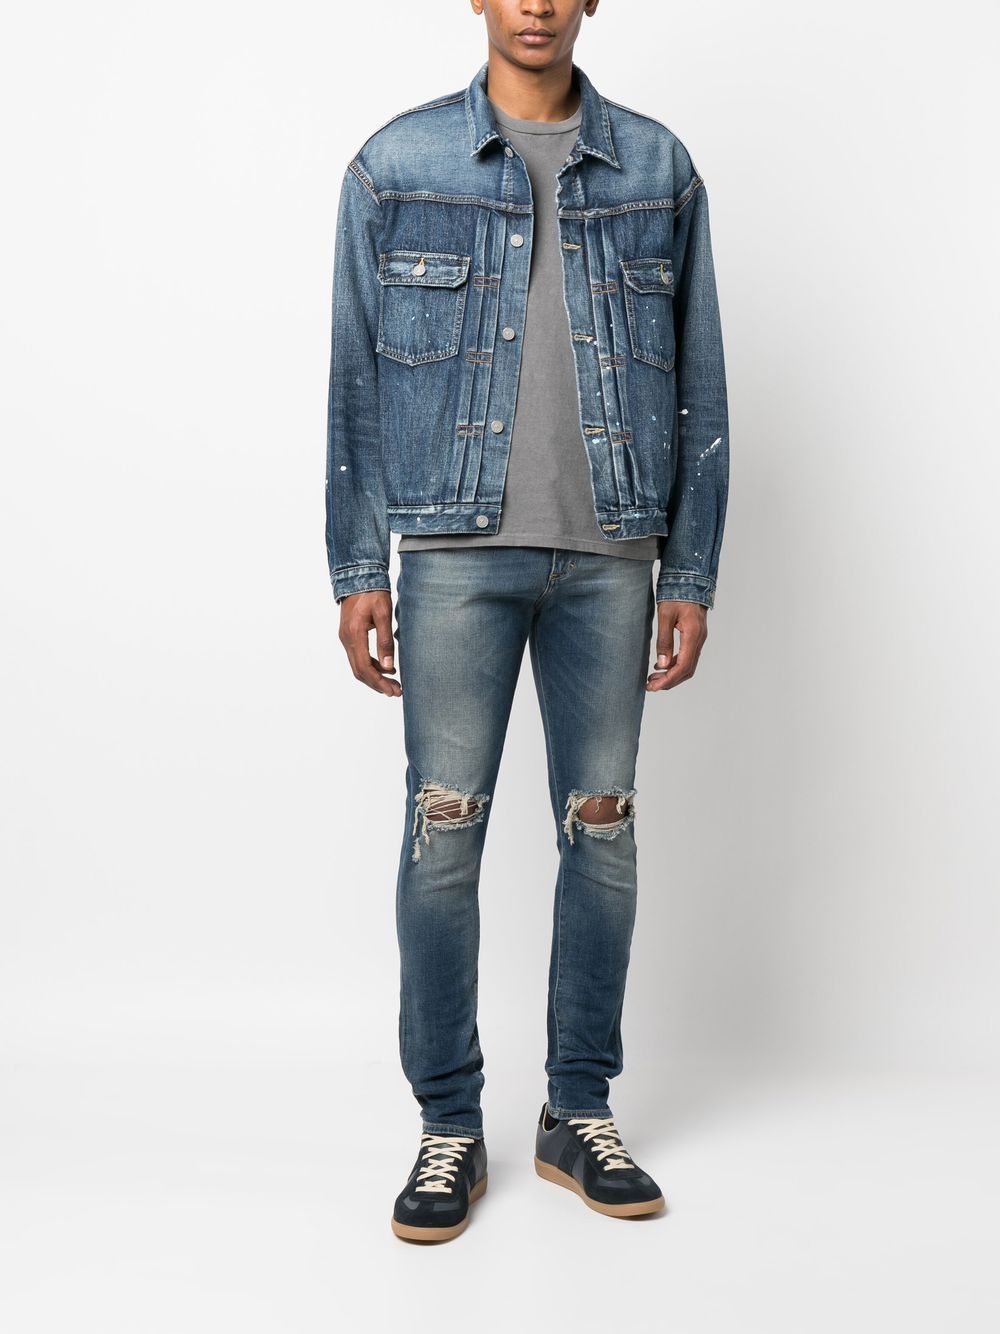 Represent Baggy Destroyer Denim Blue Jeans With Ripped Knees Detail ...